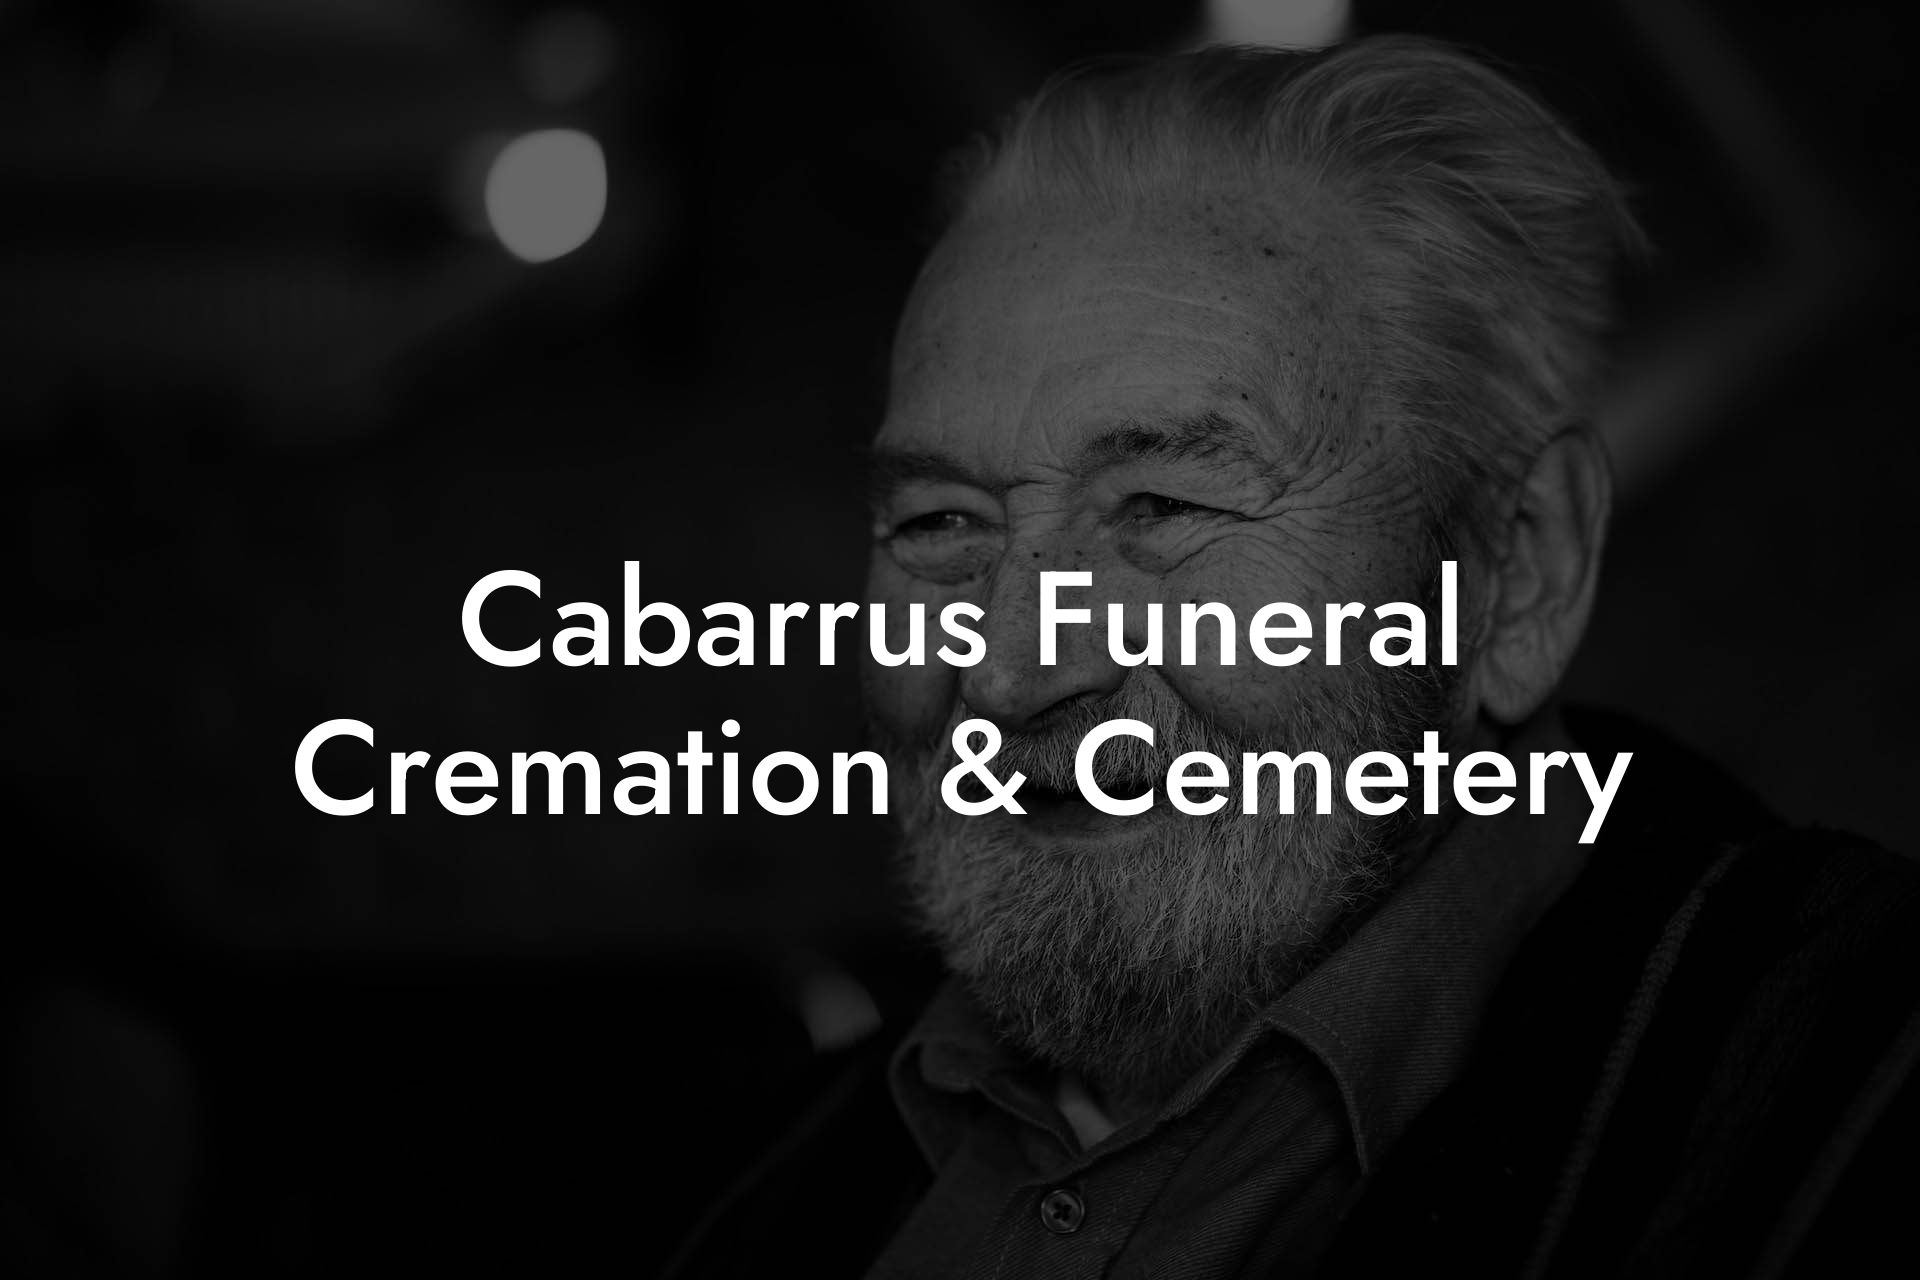 Cabarrus Funeral Cremation & Cemetery